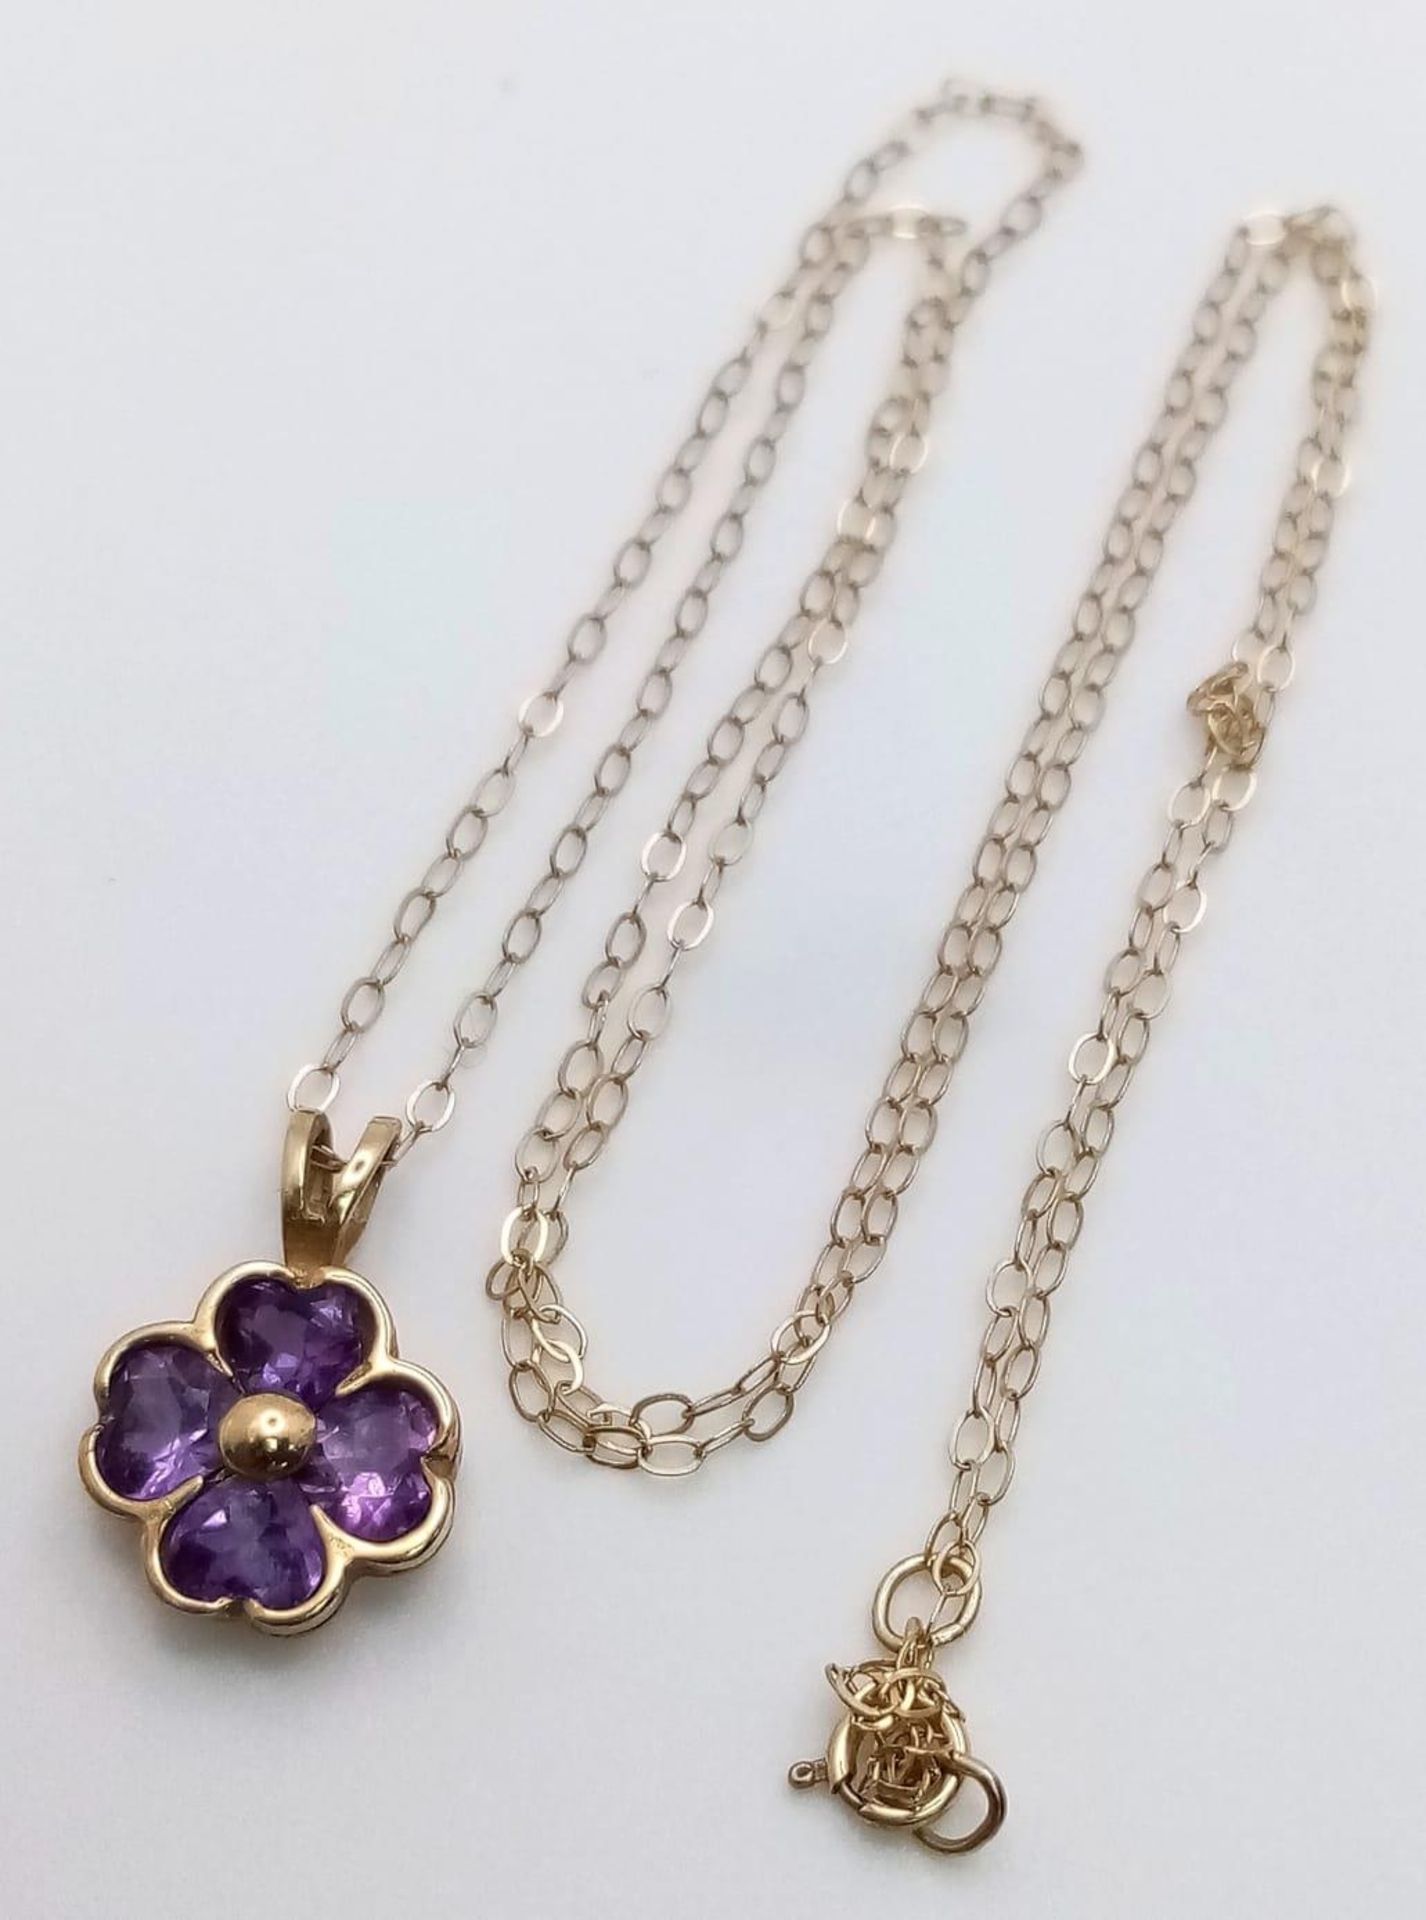 A pretty 9K Yellow Gold (tested as) Amethyst Flower pendant on Necklace, 1.3g total weight, 18”